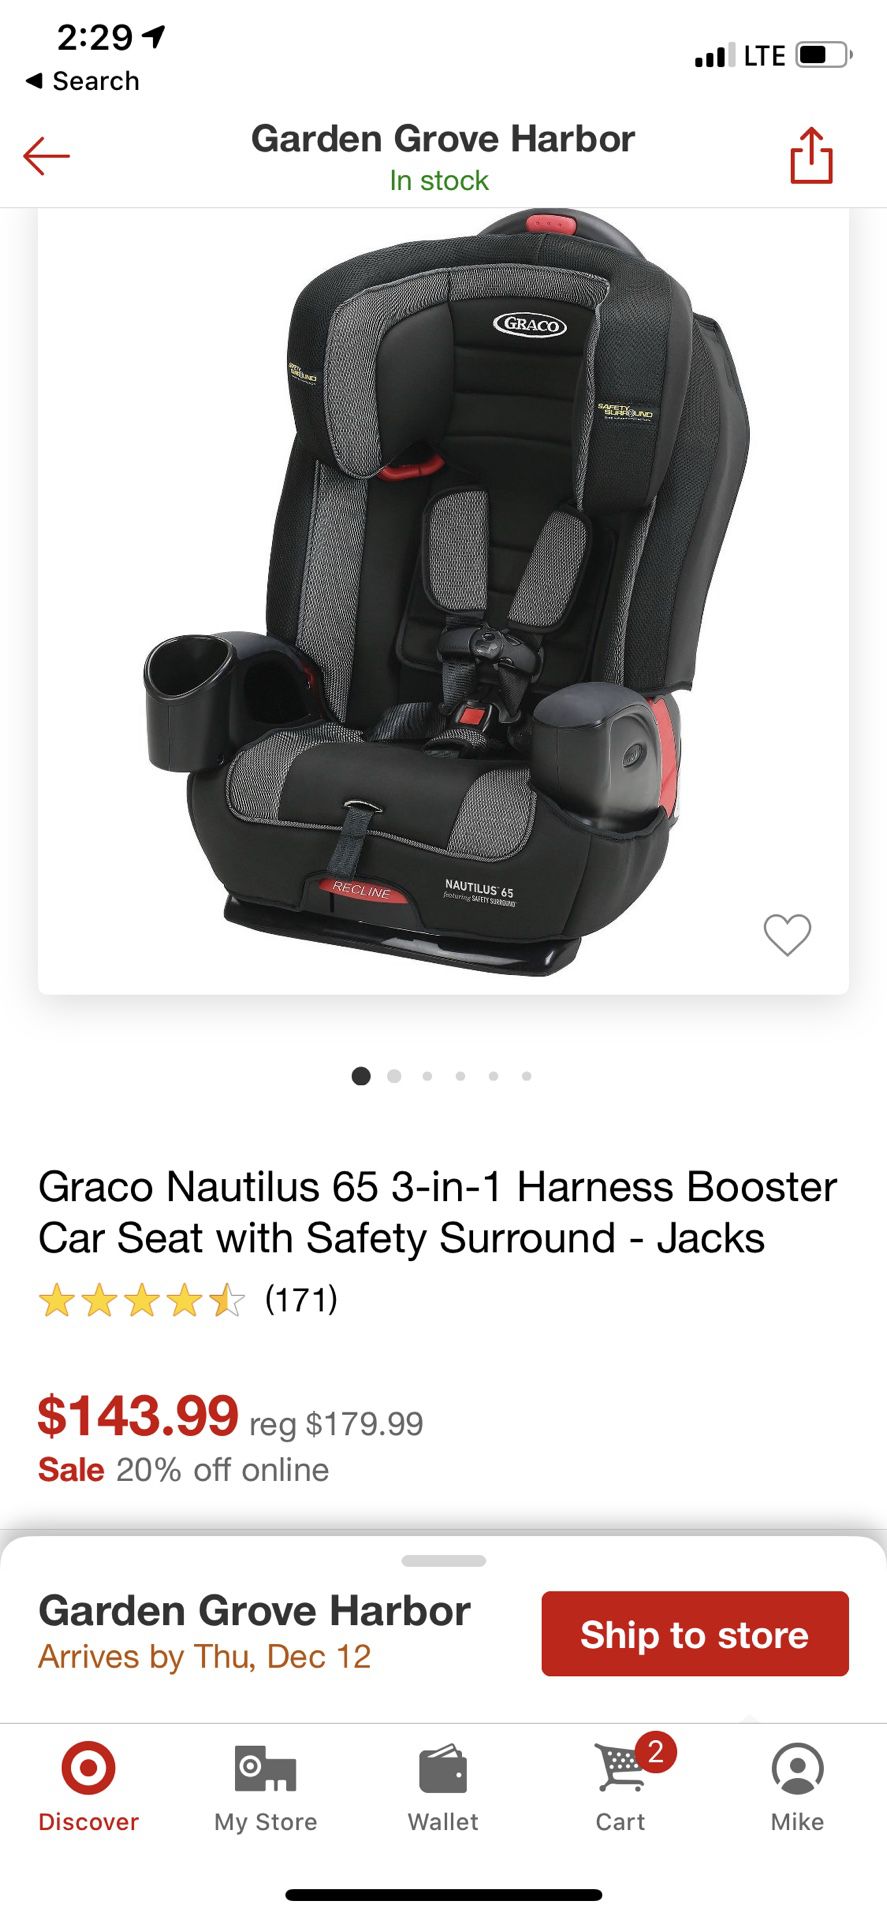 NEW! Graco Nautilus 65 3-in-1 Harness Booster Car Seat with Safety Surround - Jacks